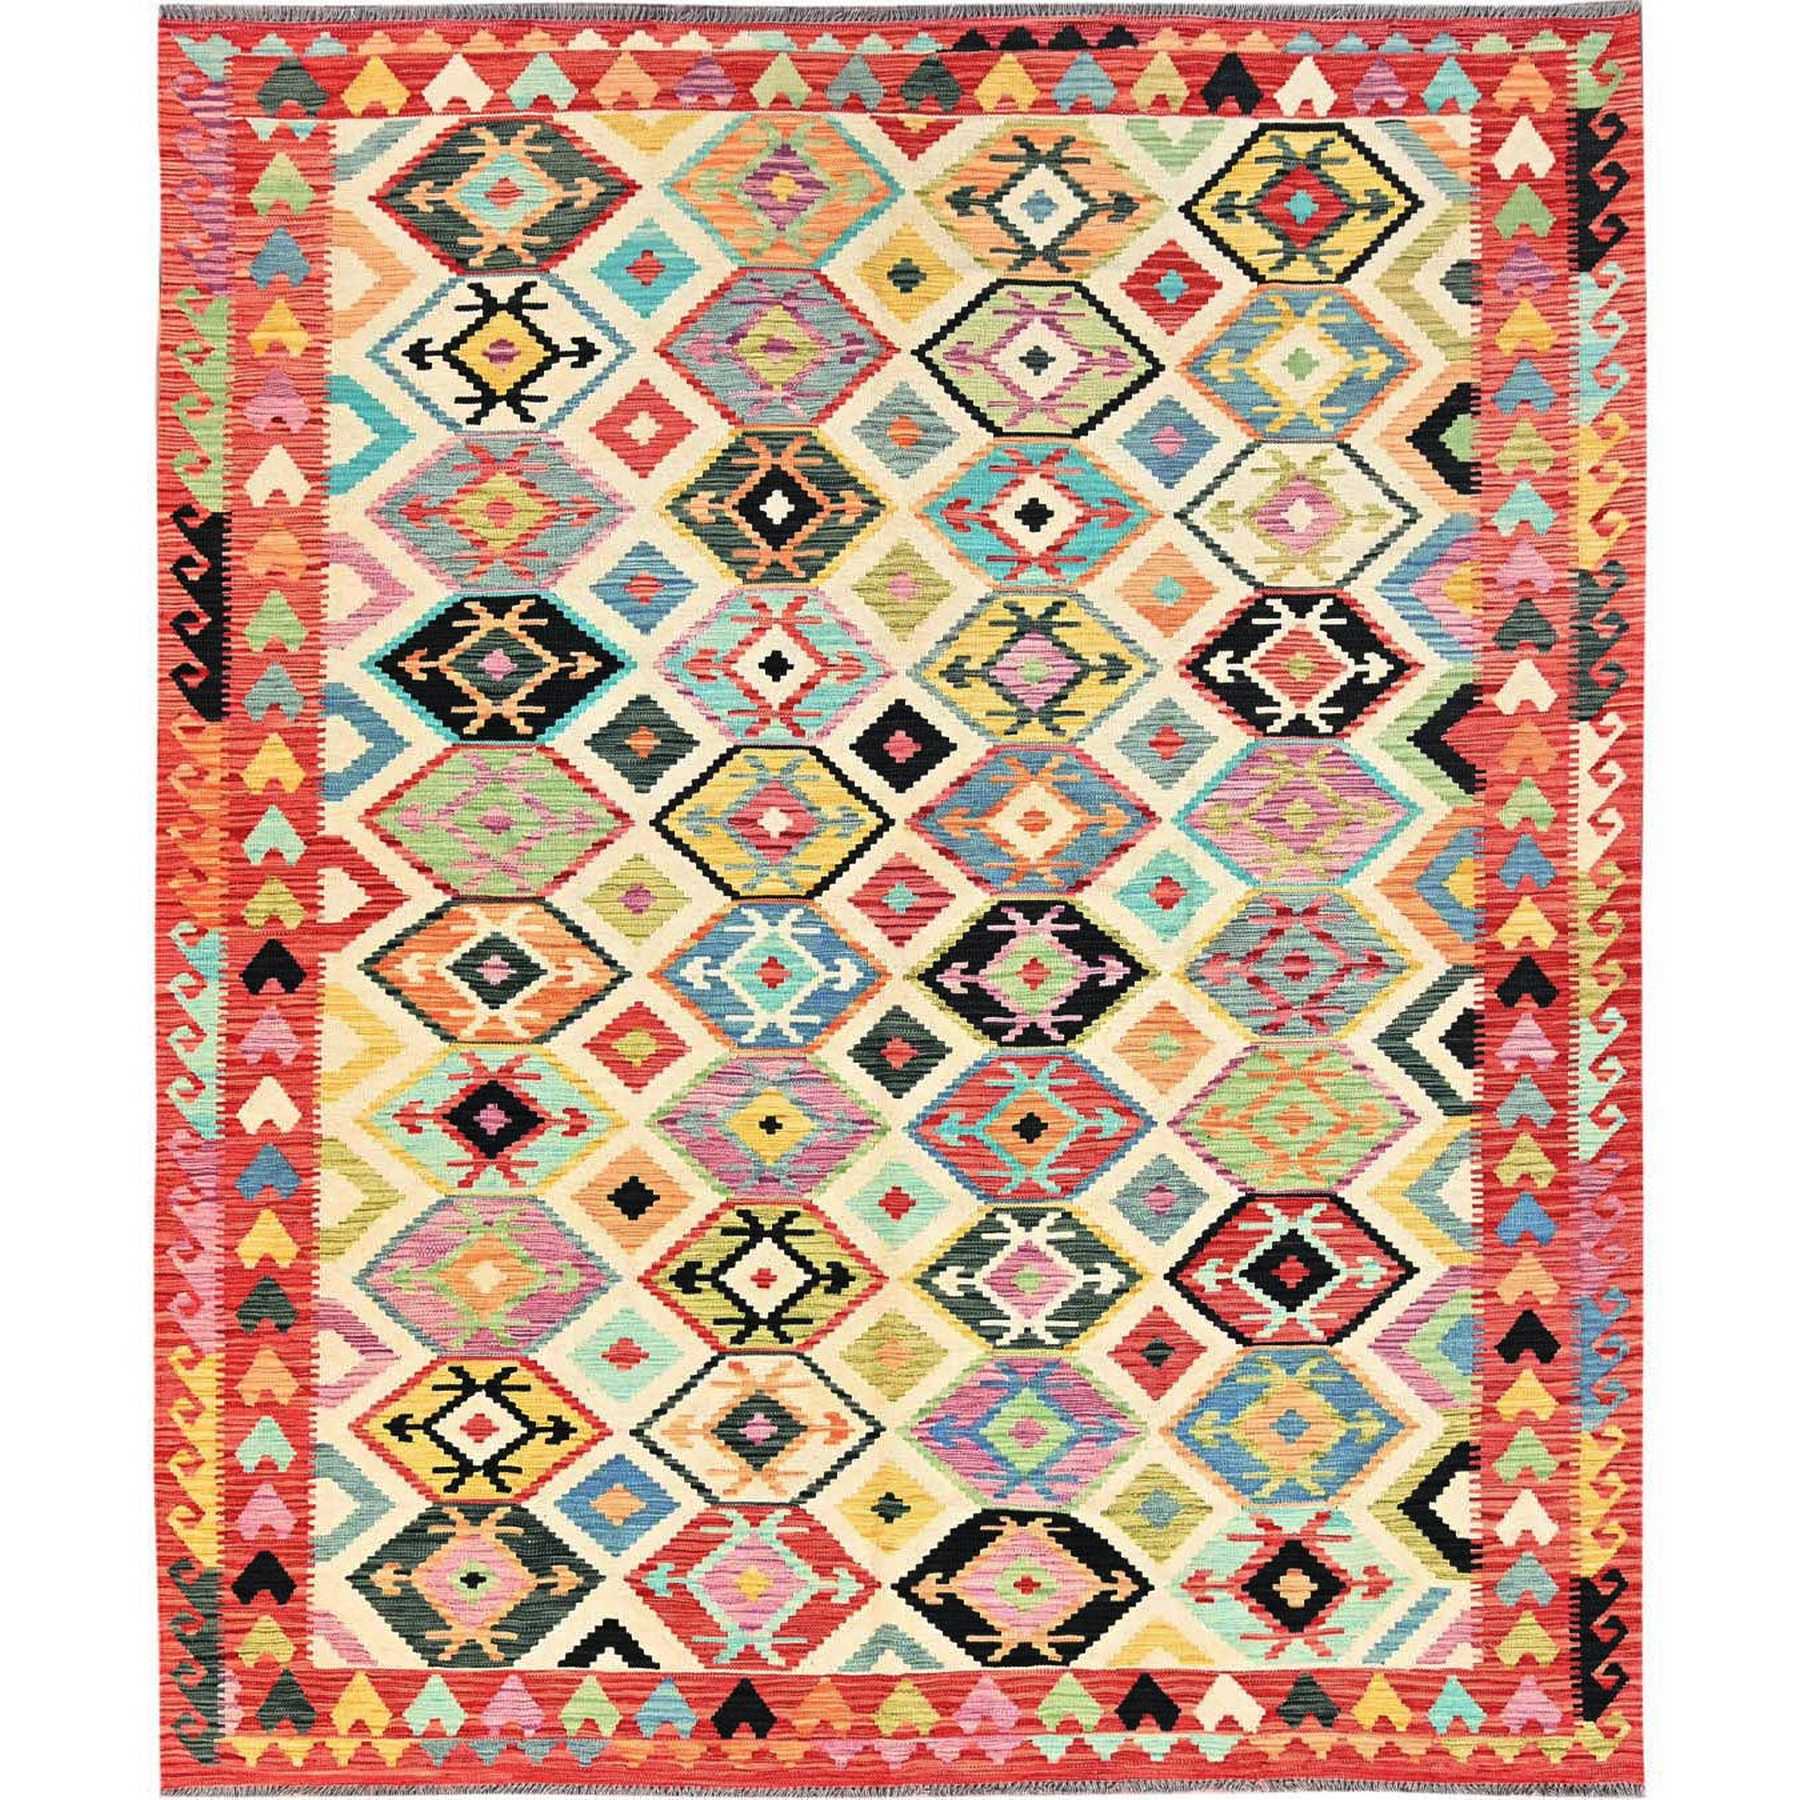 traditional Wool Hand-Woven Area Rug 8'3